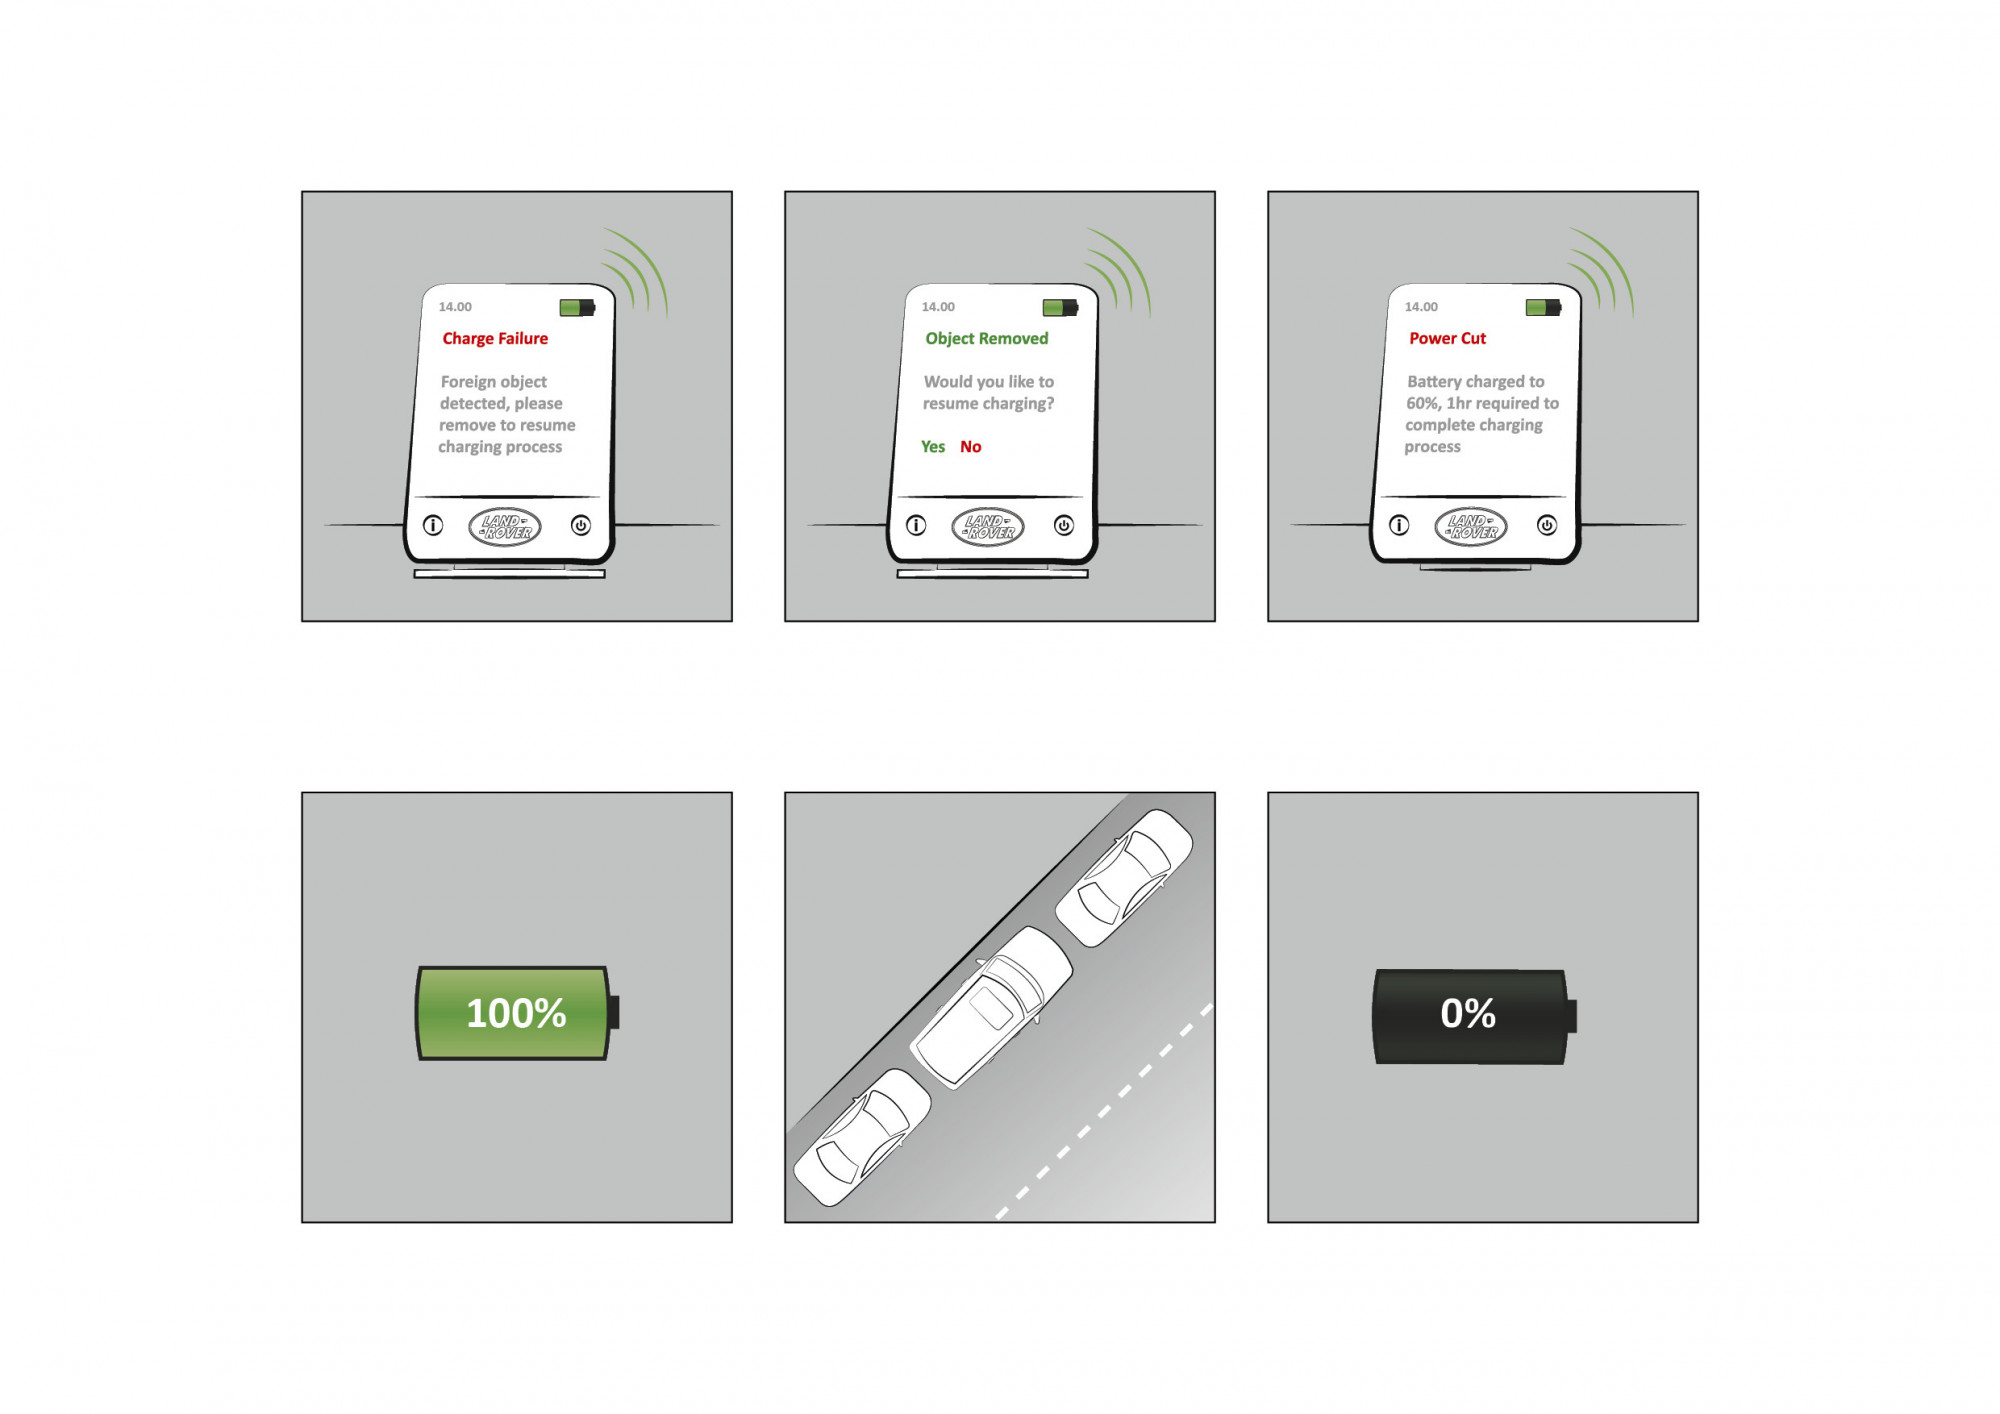 A visual render of the various stages of battery charging alerts on the interface in the car